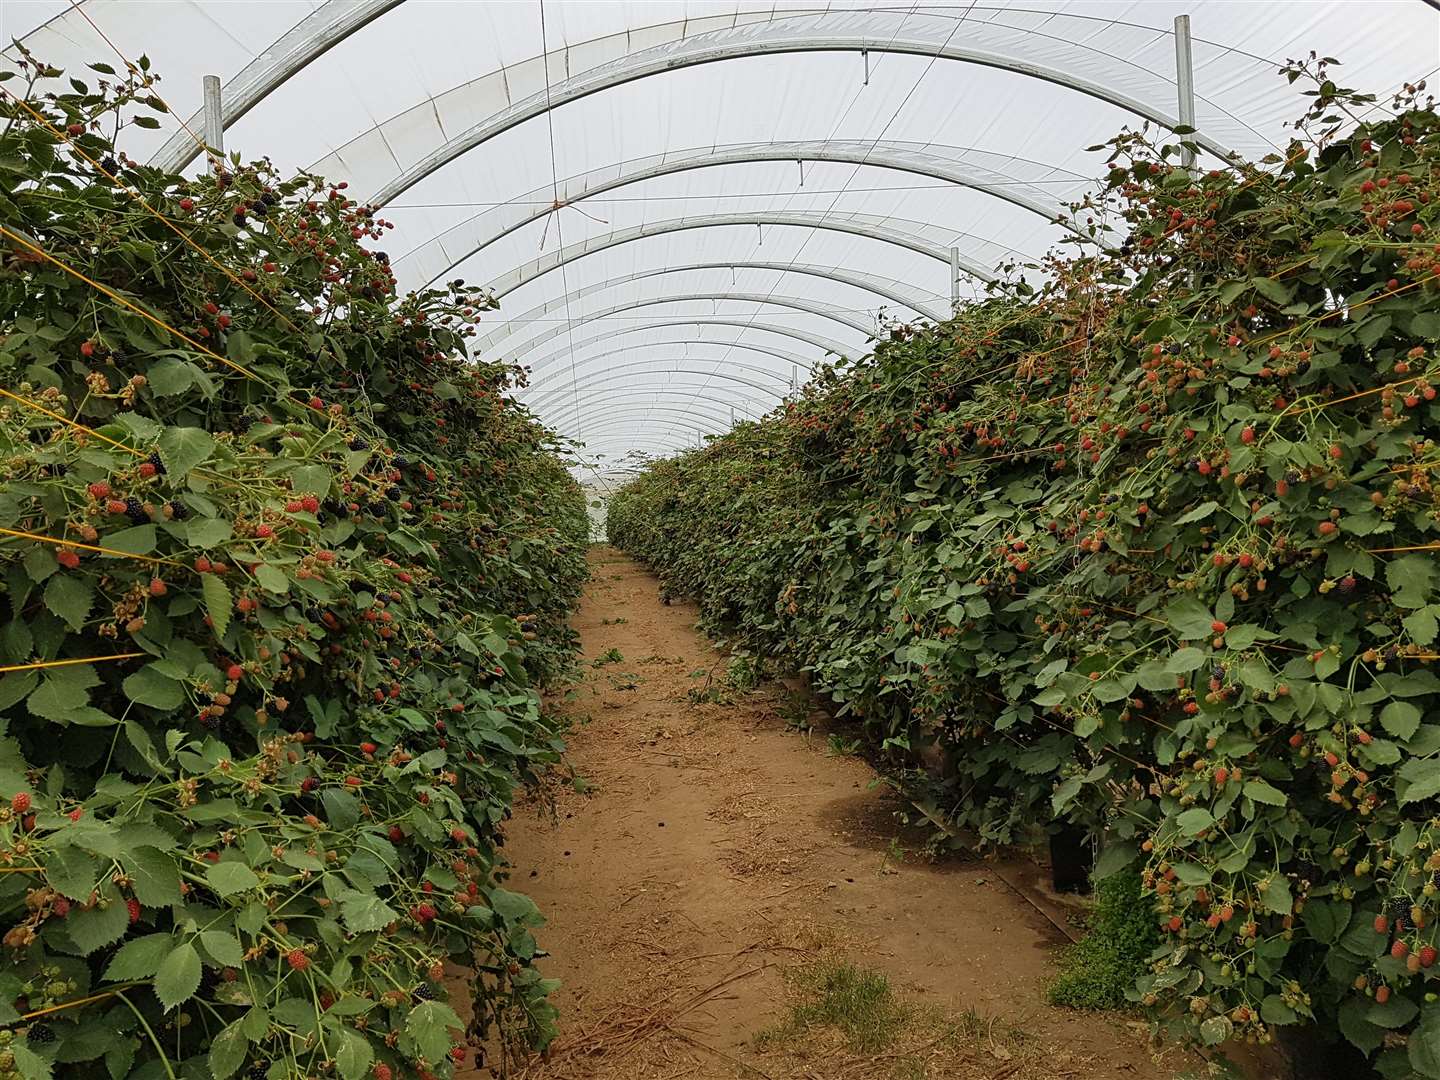 Clock House Farm in Coxheath grows a variety of fruits which it supplies to leading supermarkets